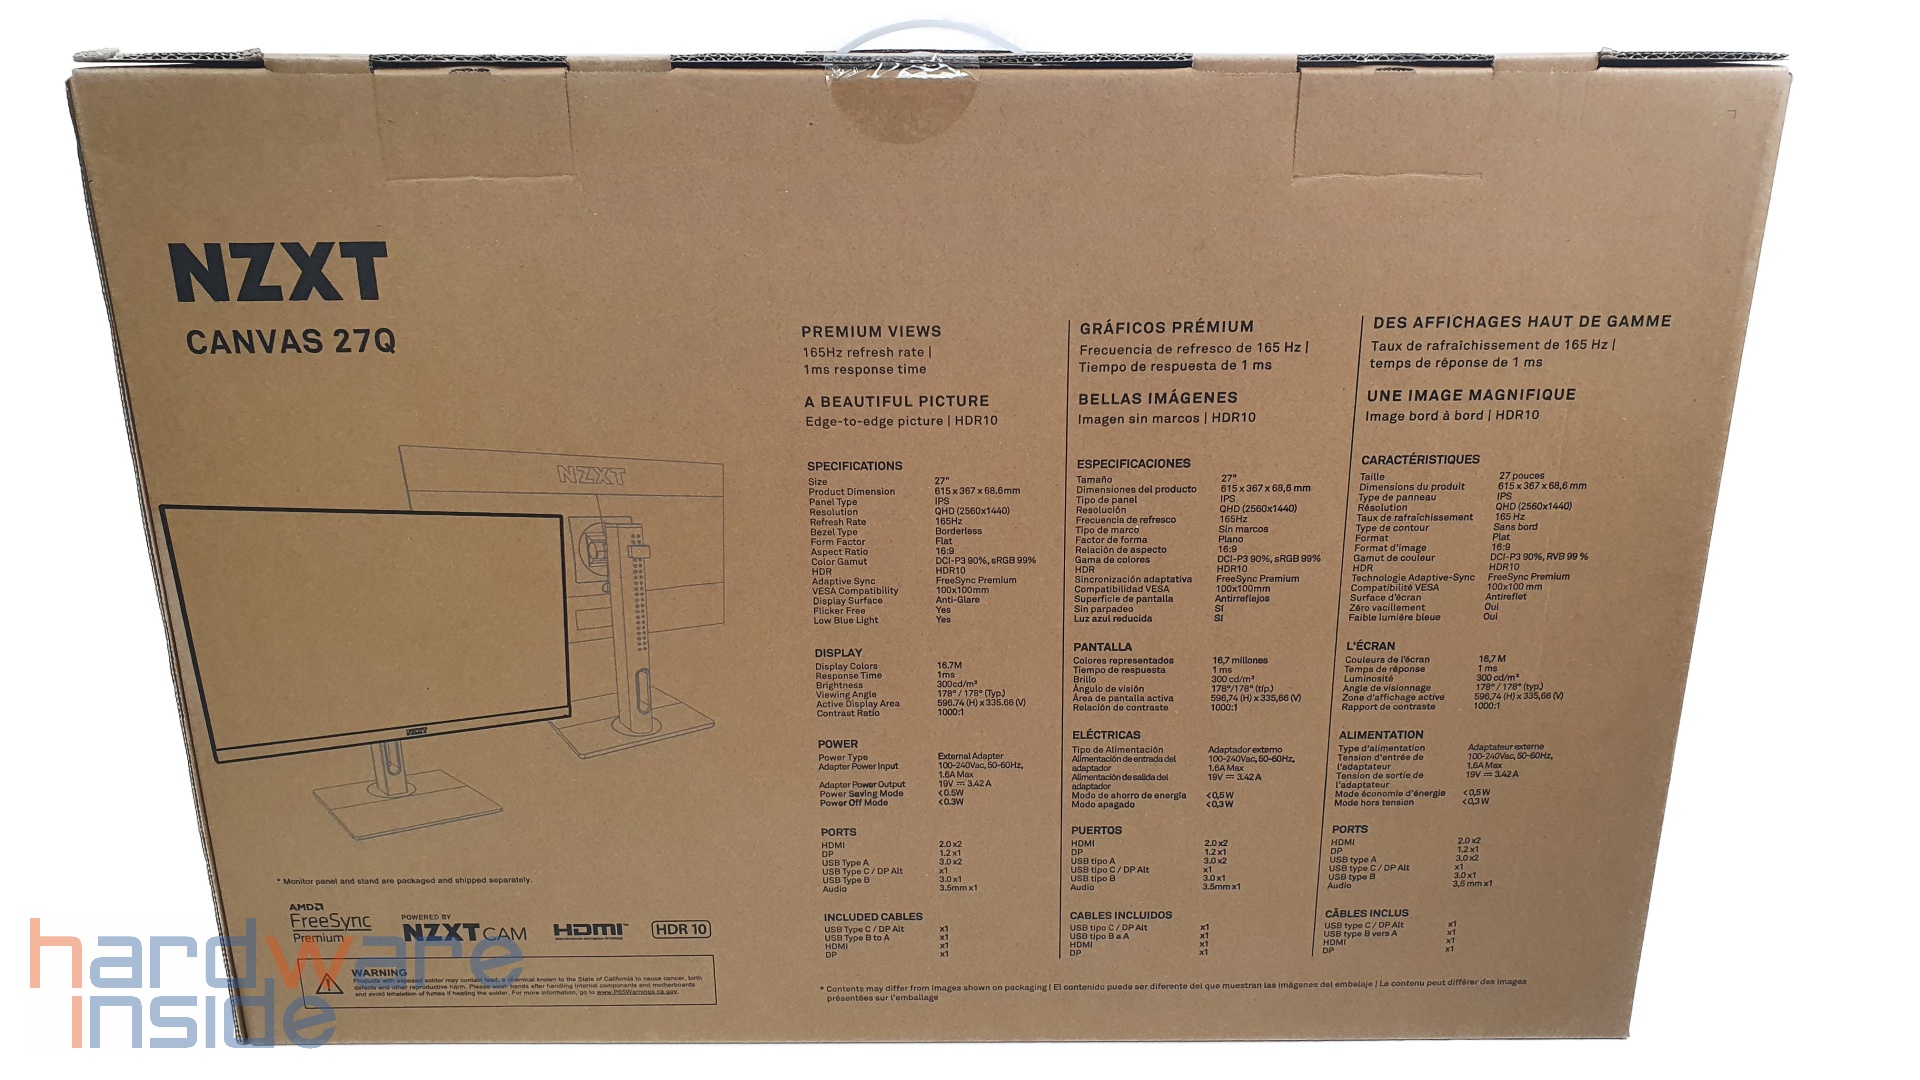 nzxt-canvas-27q-verpackung-back.jpg